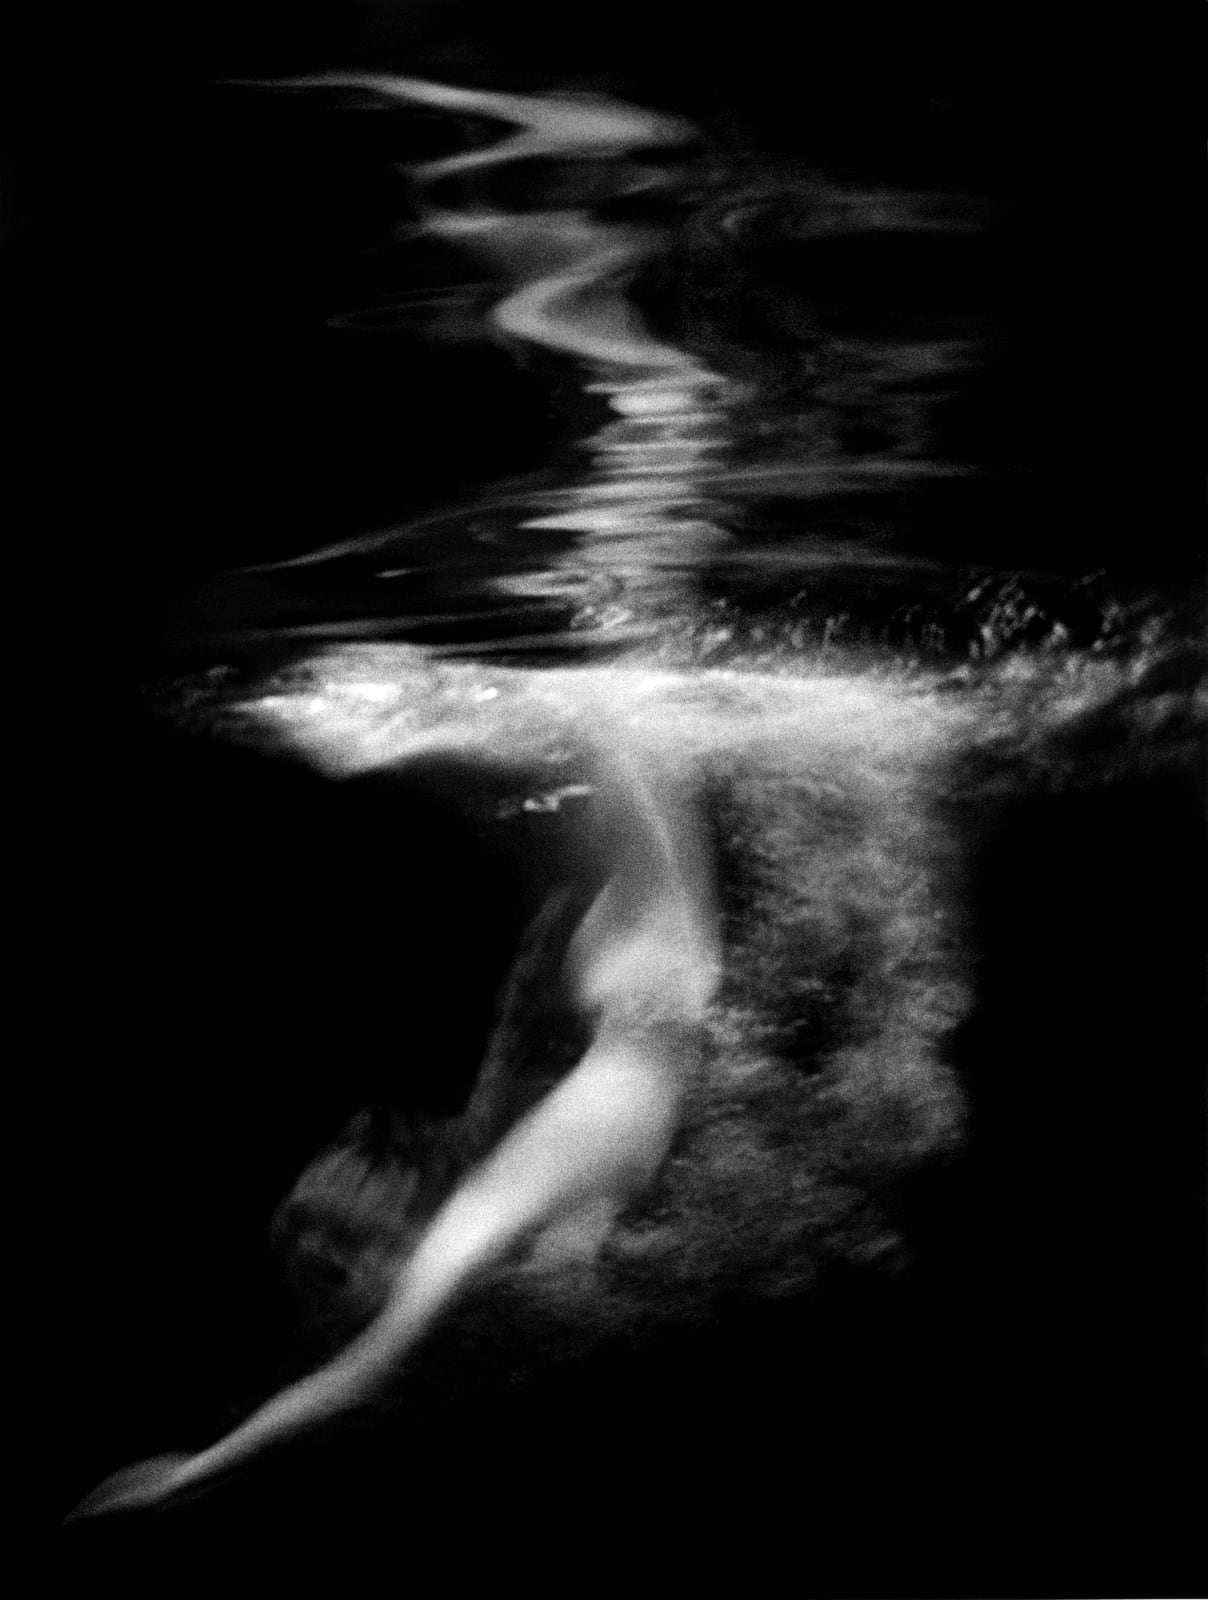 nude woman diving into pool, by Lillian Bassman